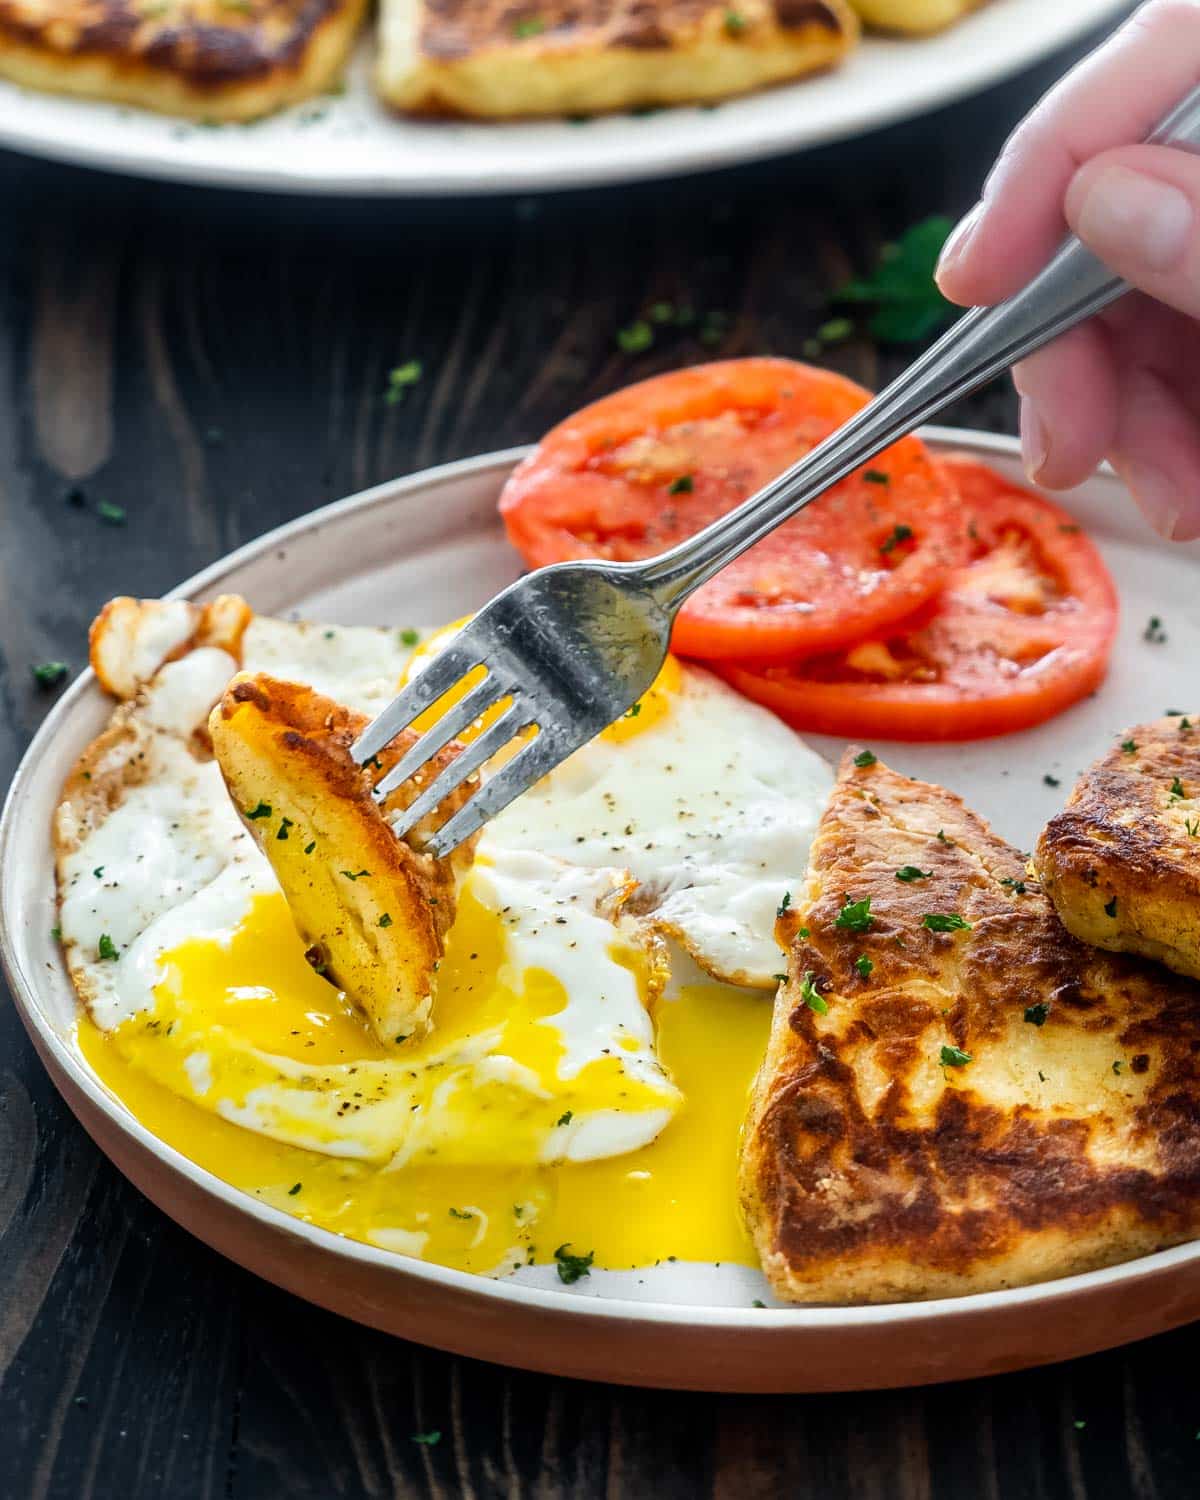 a plate with 2 fried eggs, 2 irish potato cakes and 2 slices of tomatoes.